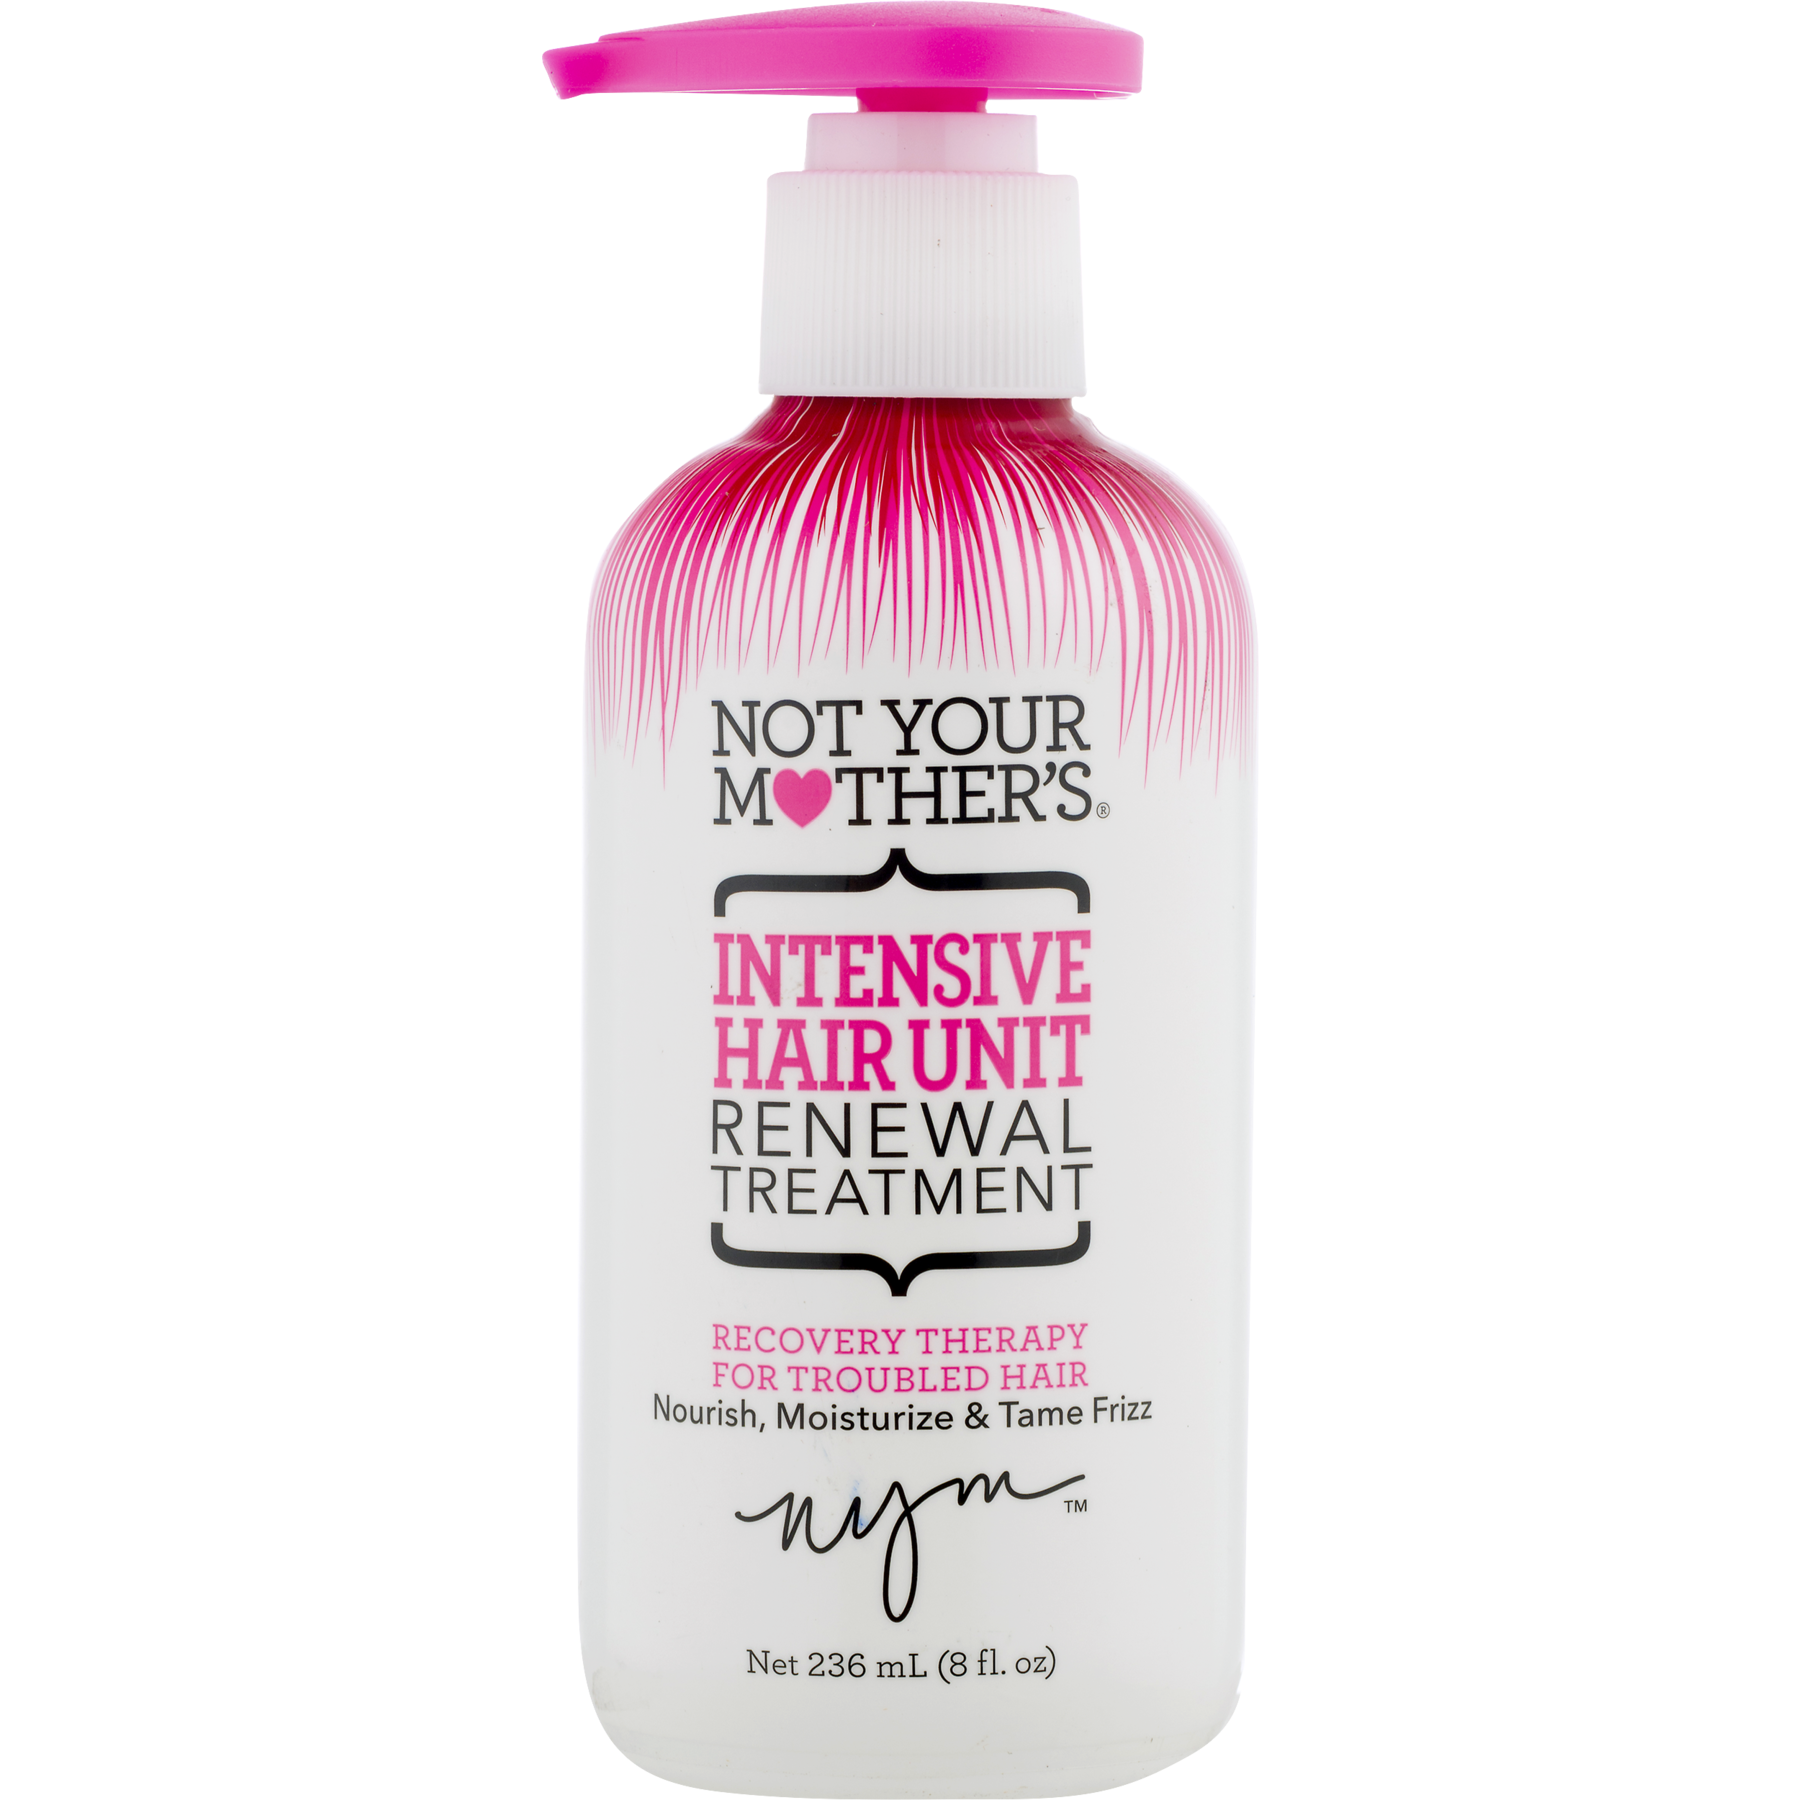 Not Your Mother's Intensive Hair Unit Renewal Treatment, 8 oz - image 4 of 5